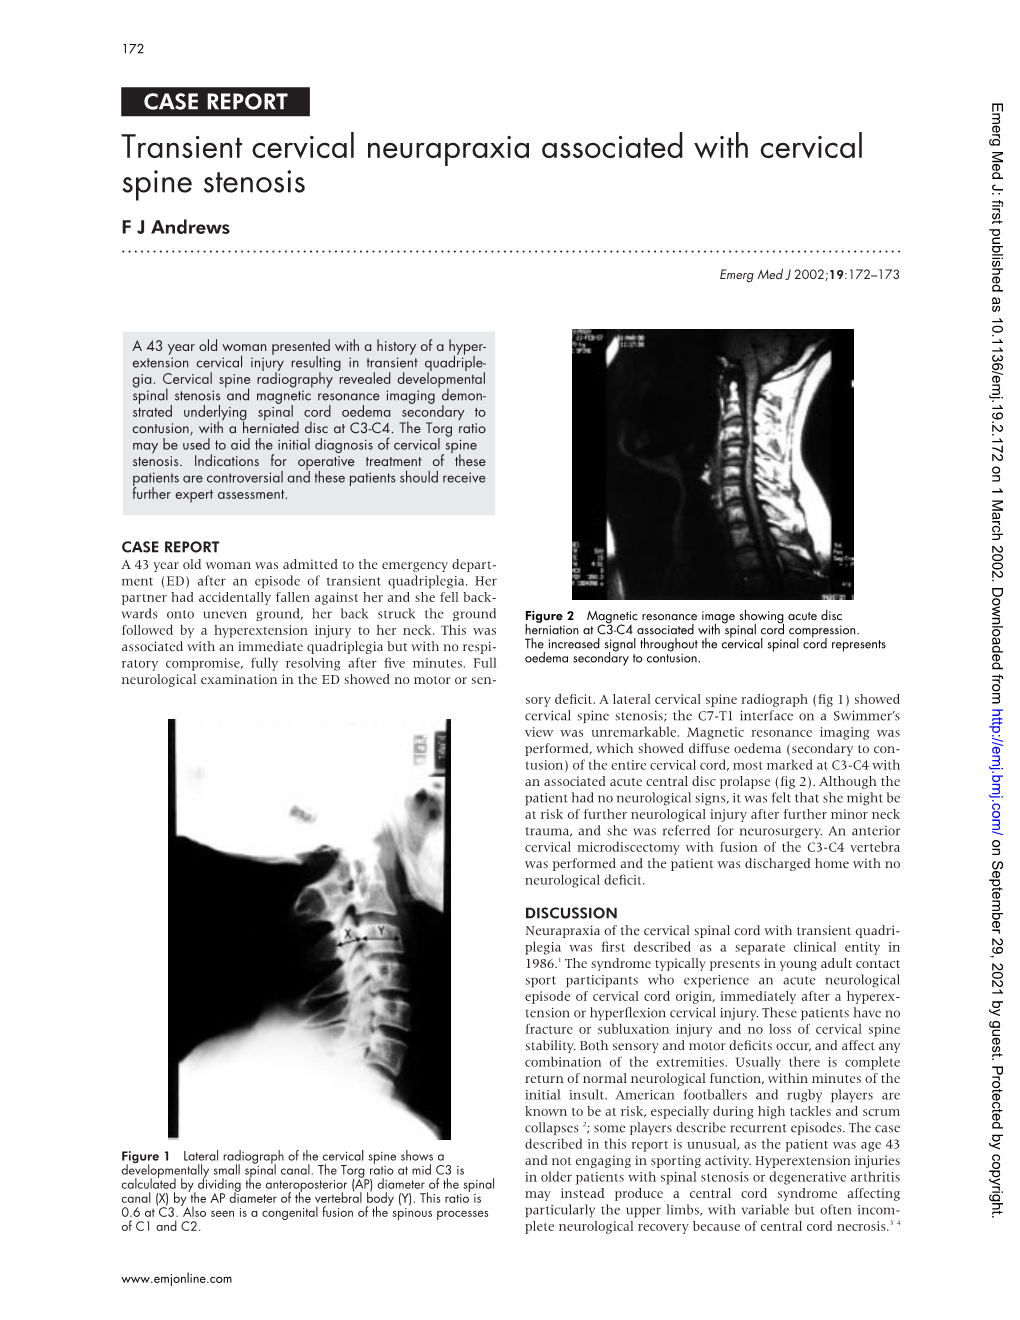 Transient Cervical Neurapraxia Associated with Cervical Spine Stenosis F J Andrews